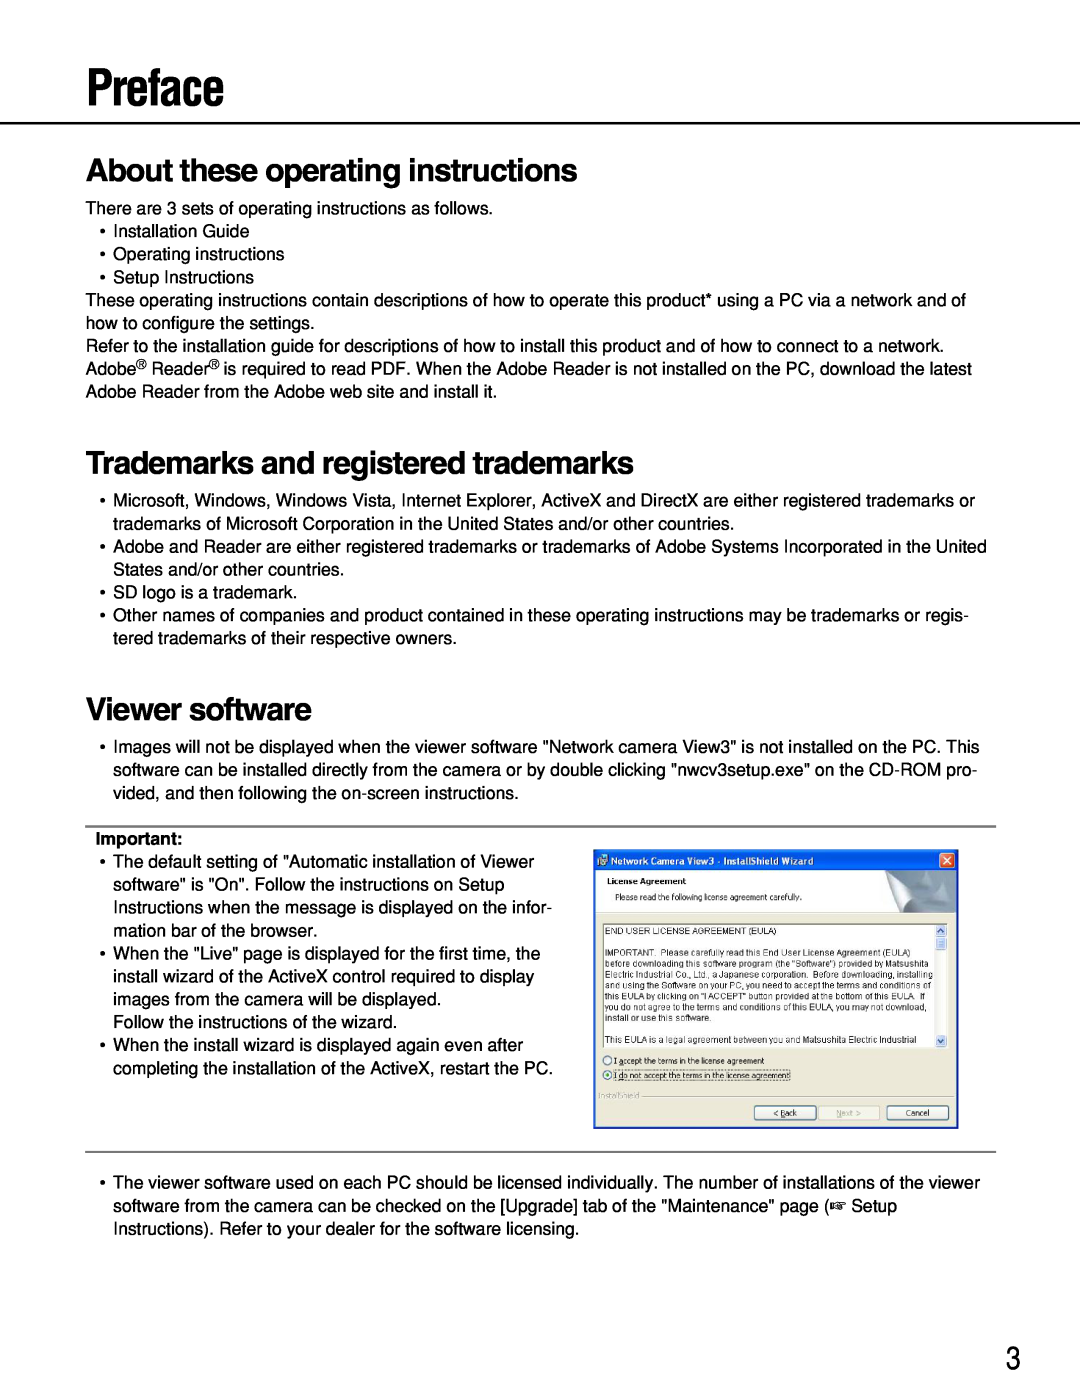 Panasonic WV-NF302 Preface, About these operating instructions, Trademarks and registered trademarks, Viewer software 